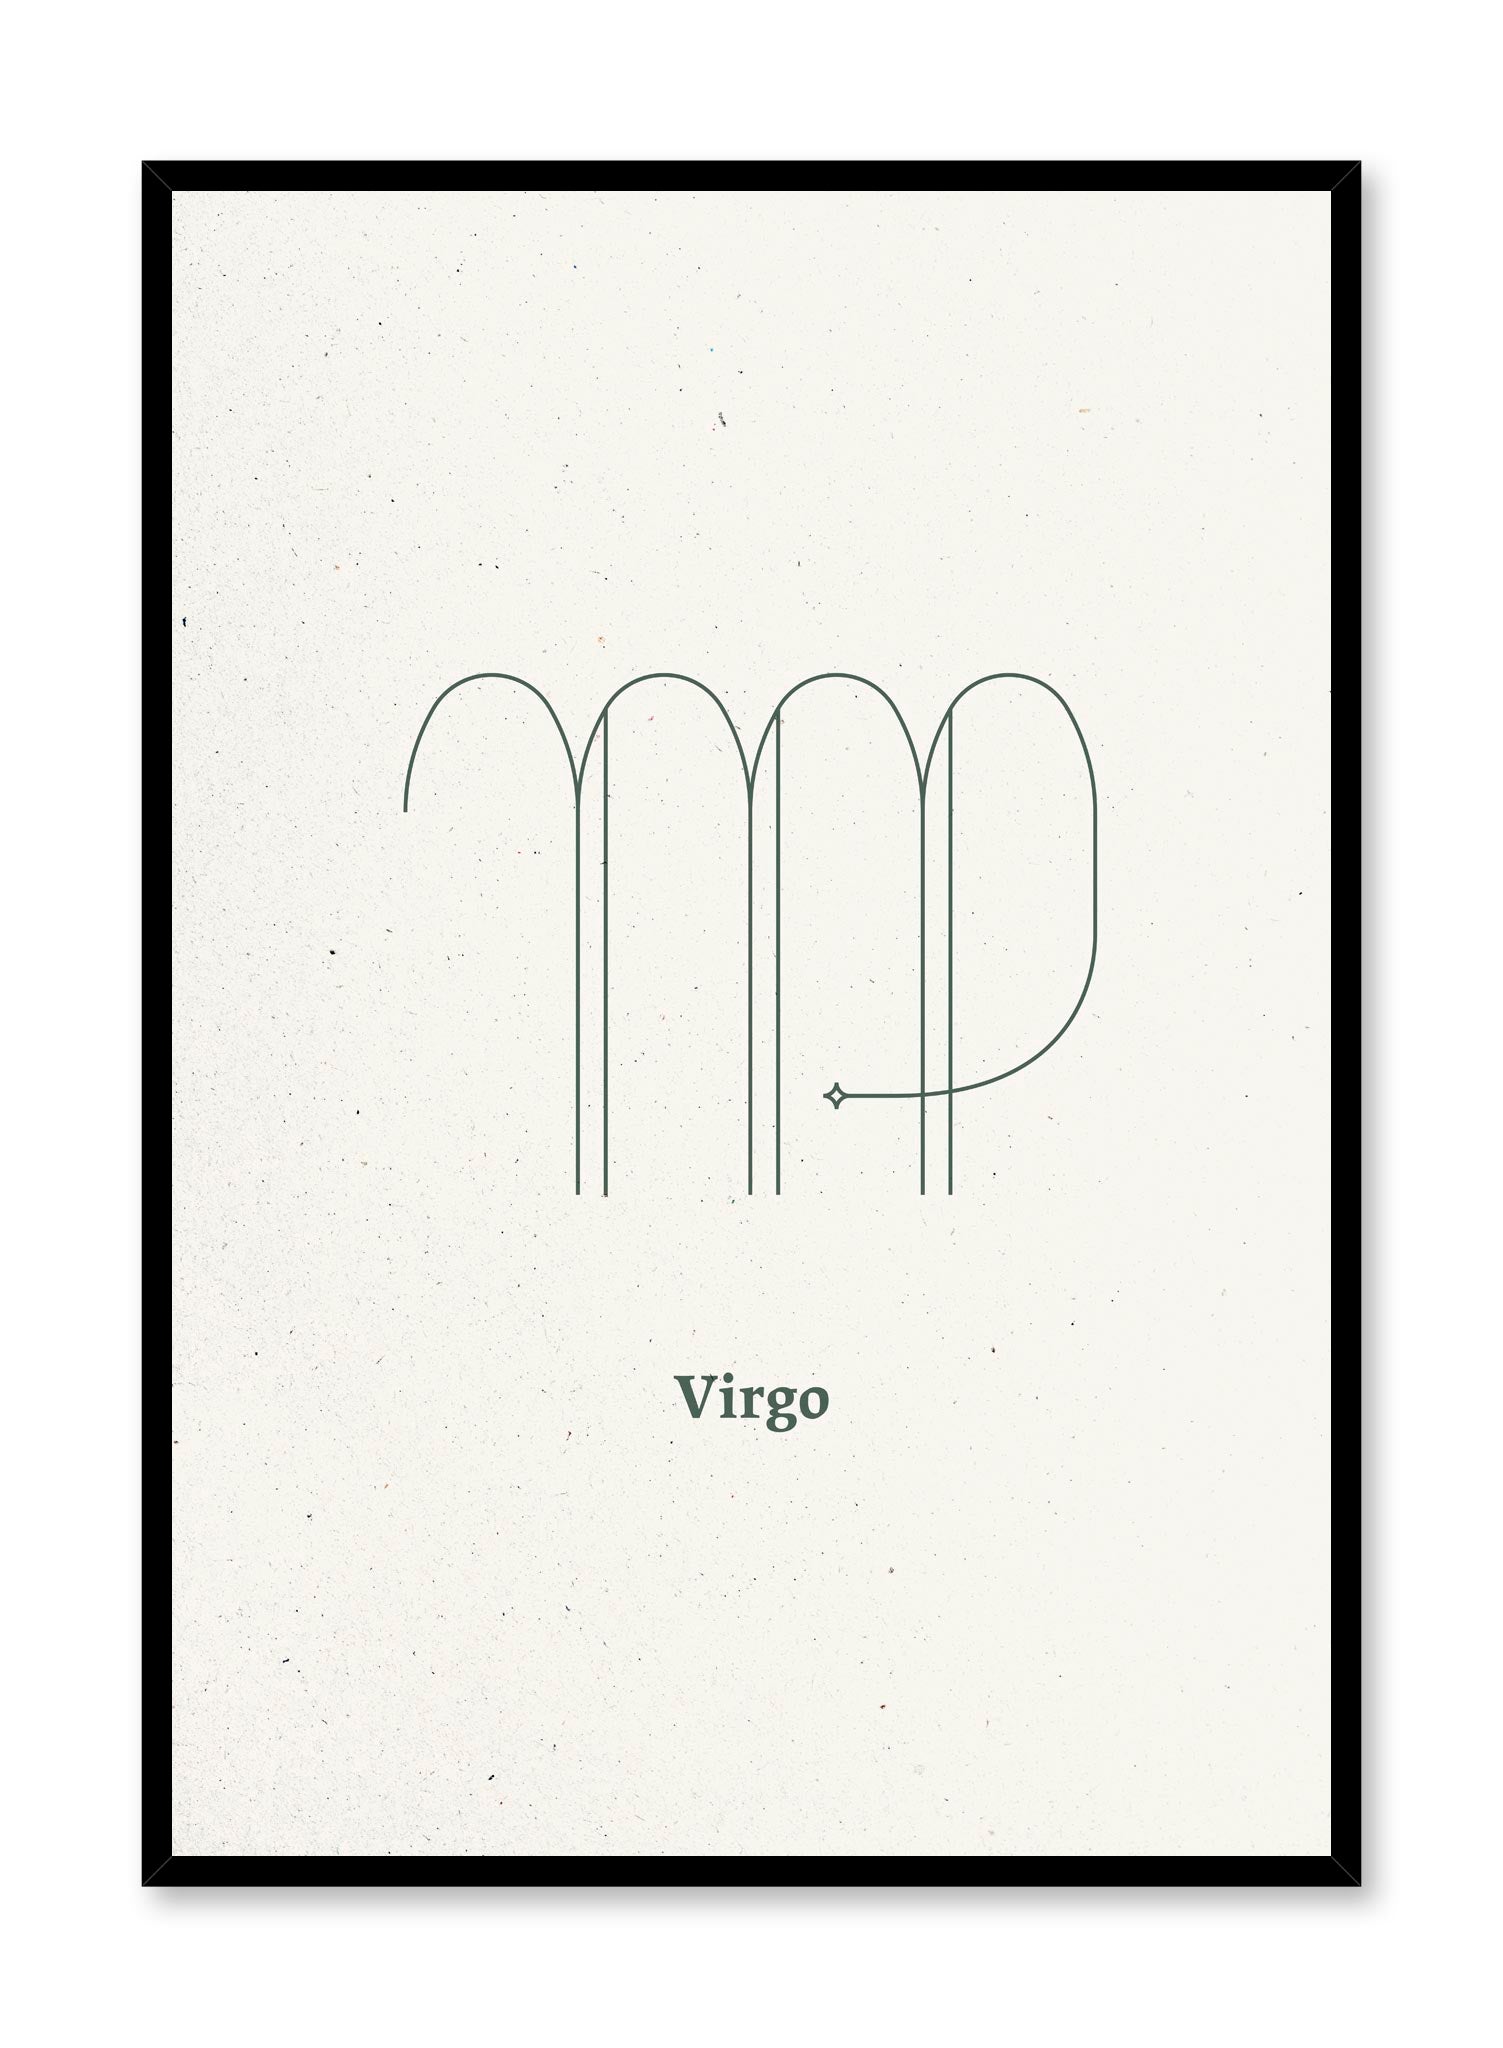 Minimalist celestial illustration poster by Opposite Wall with Virgo symbol